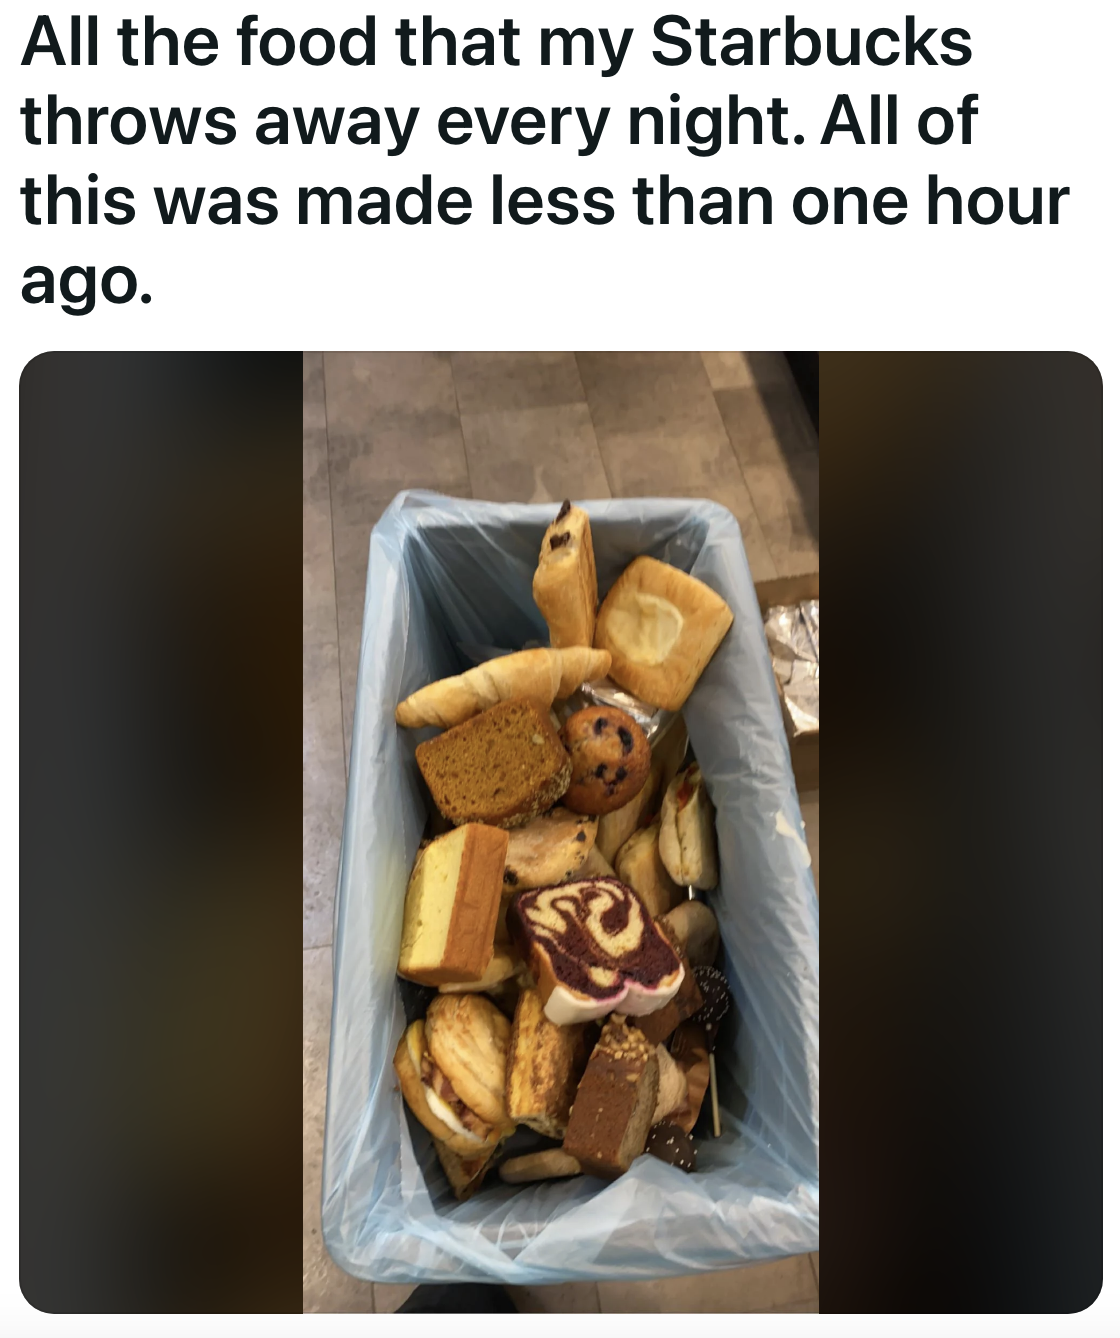 The bin is full of bread and pastries, with a caption that says they were all made less than an hour ago